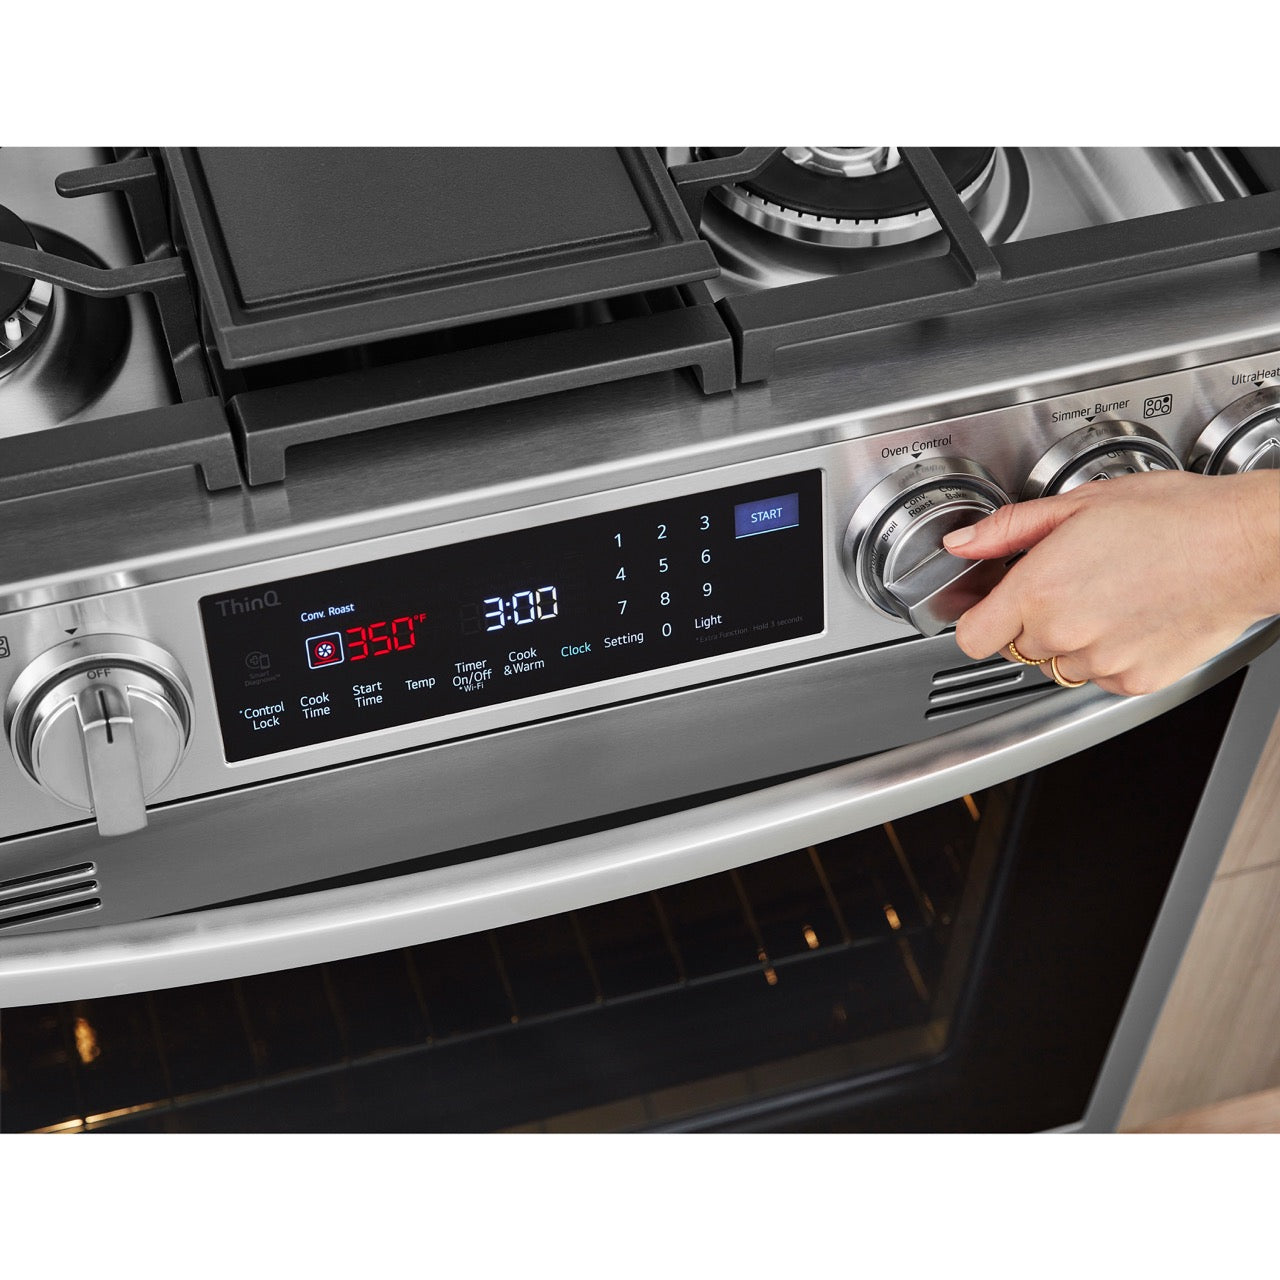 LG 6.3-Cu. Ft. Smart Wi-Fi Enabled ProBake Convection InstaView Gas Slide-in Range with Air Fry, Stainless Steel (LSGL6337F)